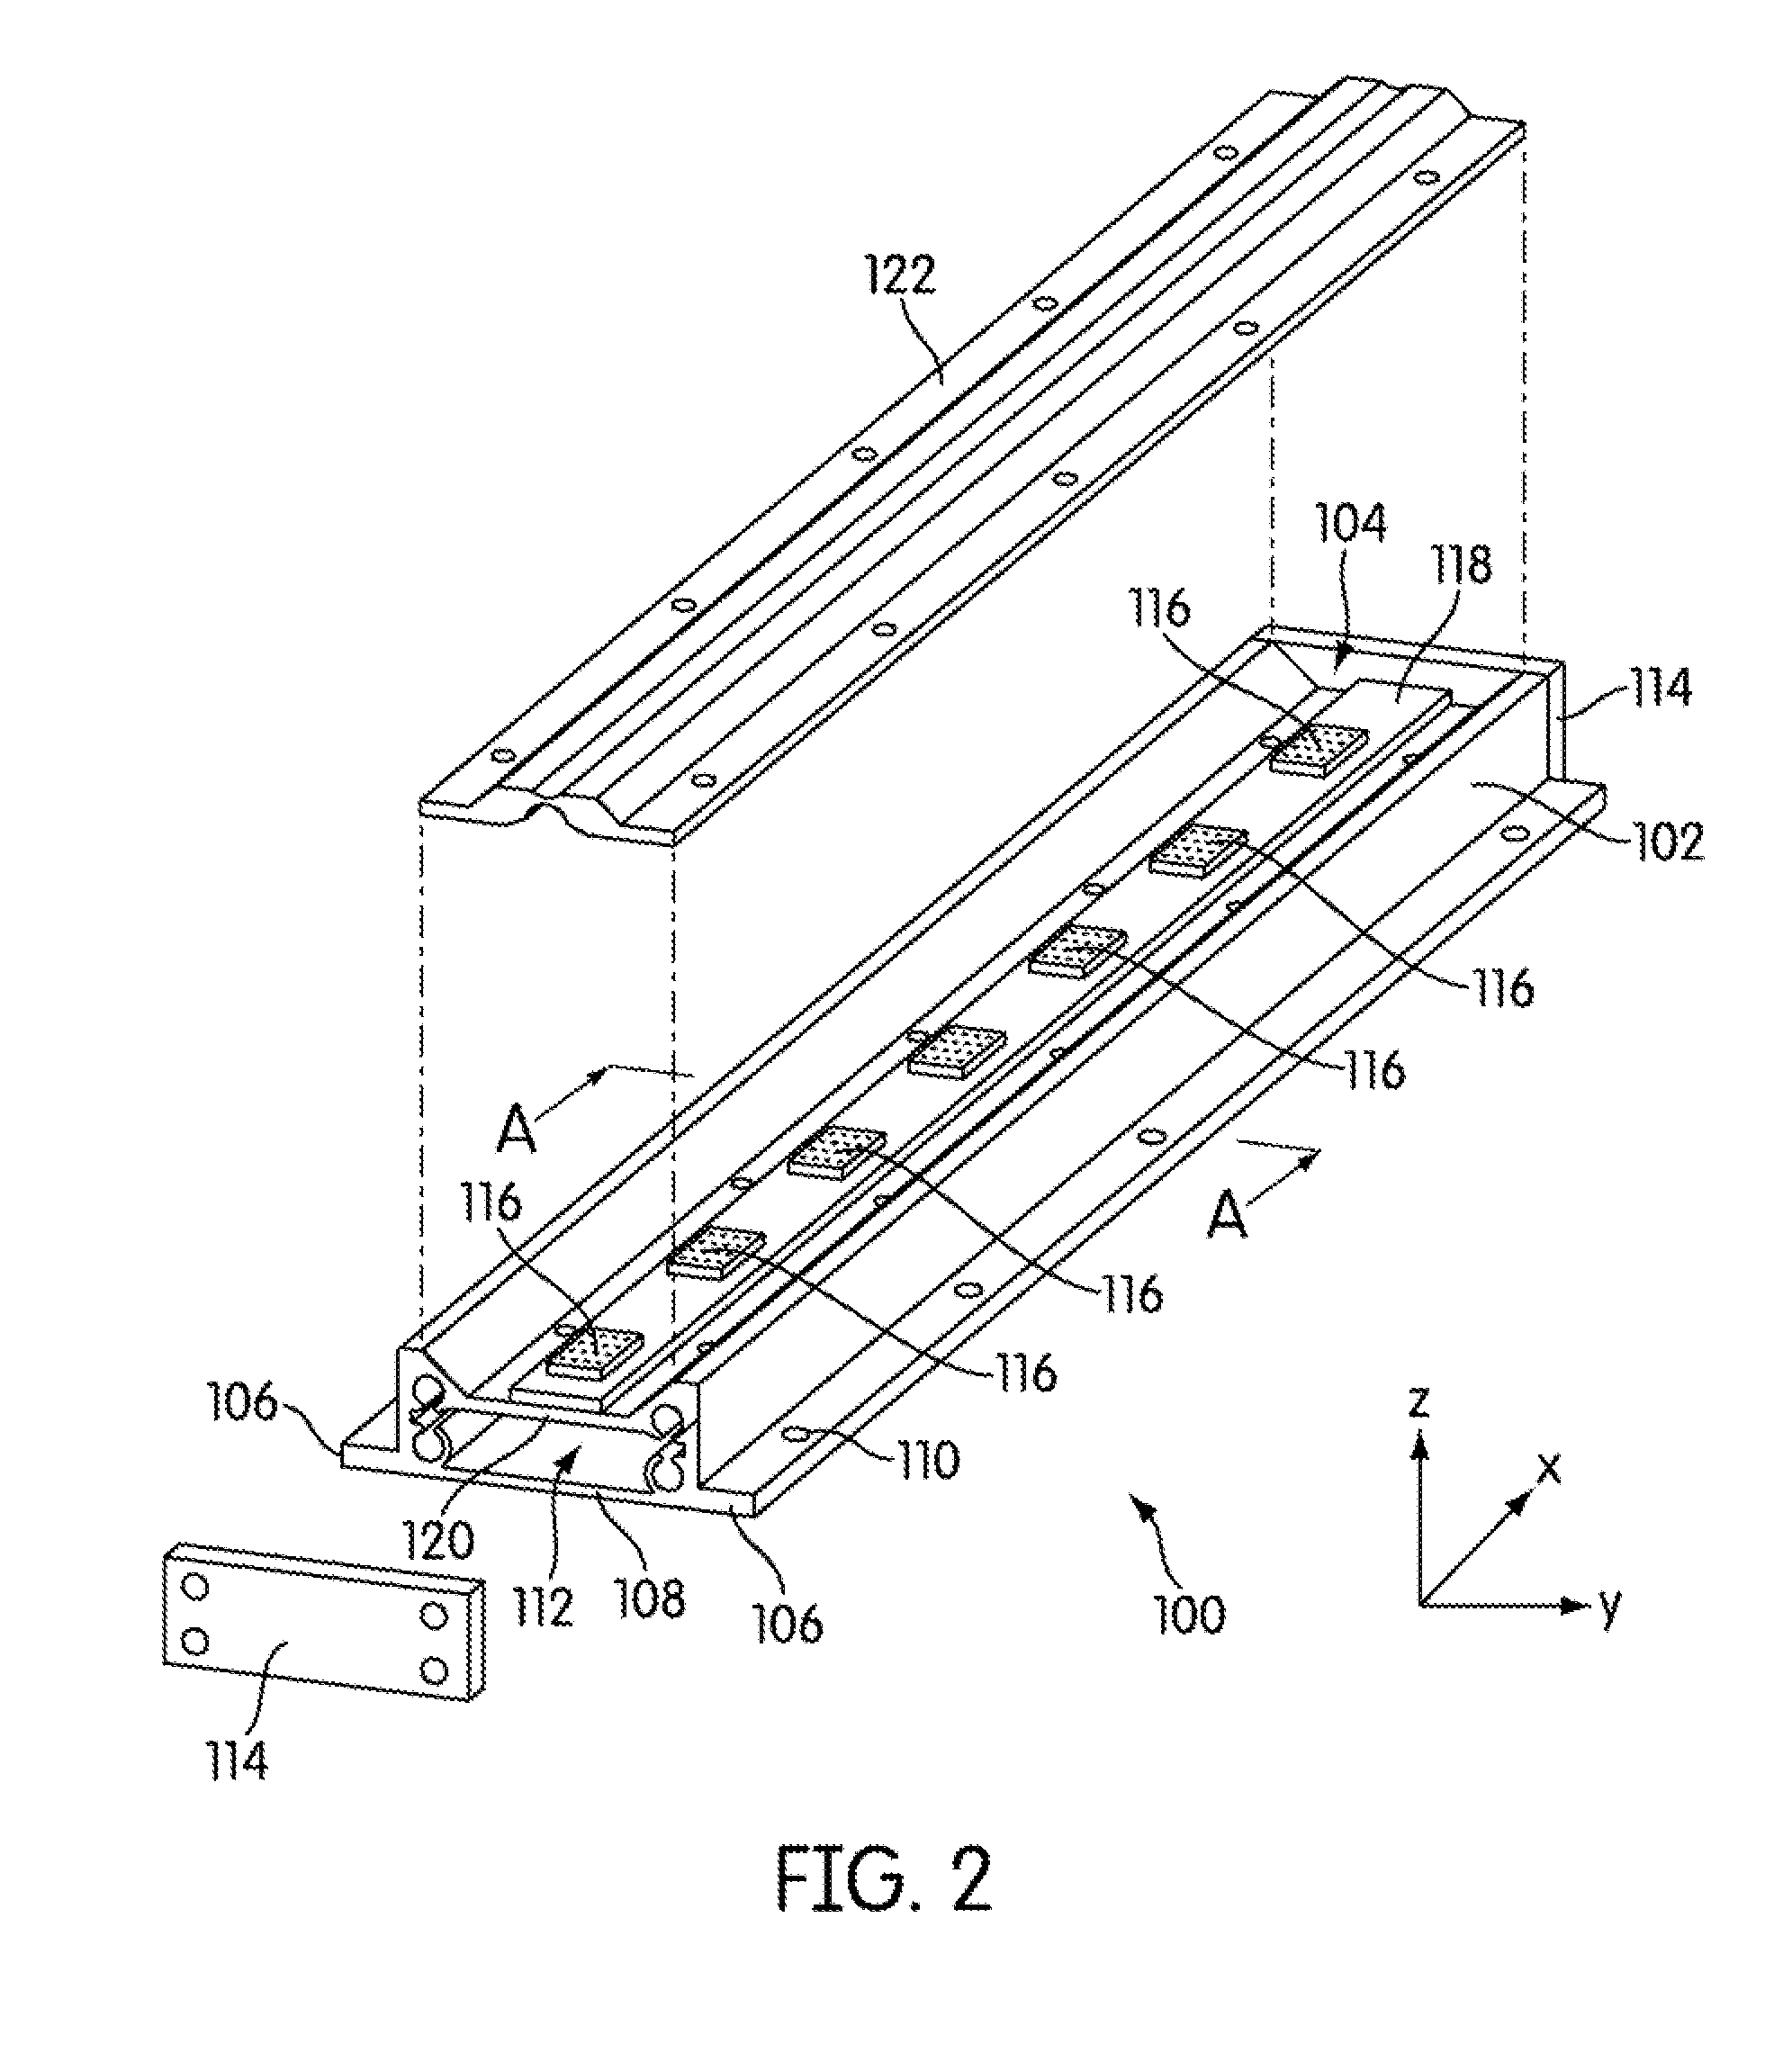 Light emitting diode based linear lamps